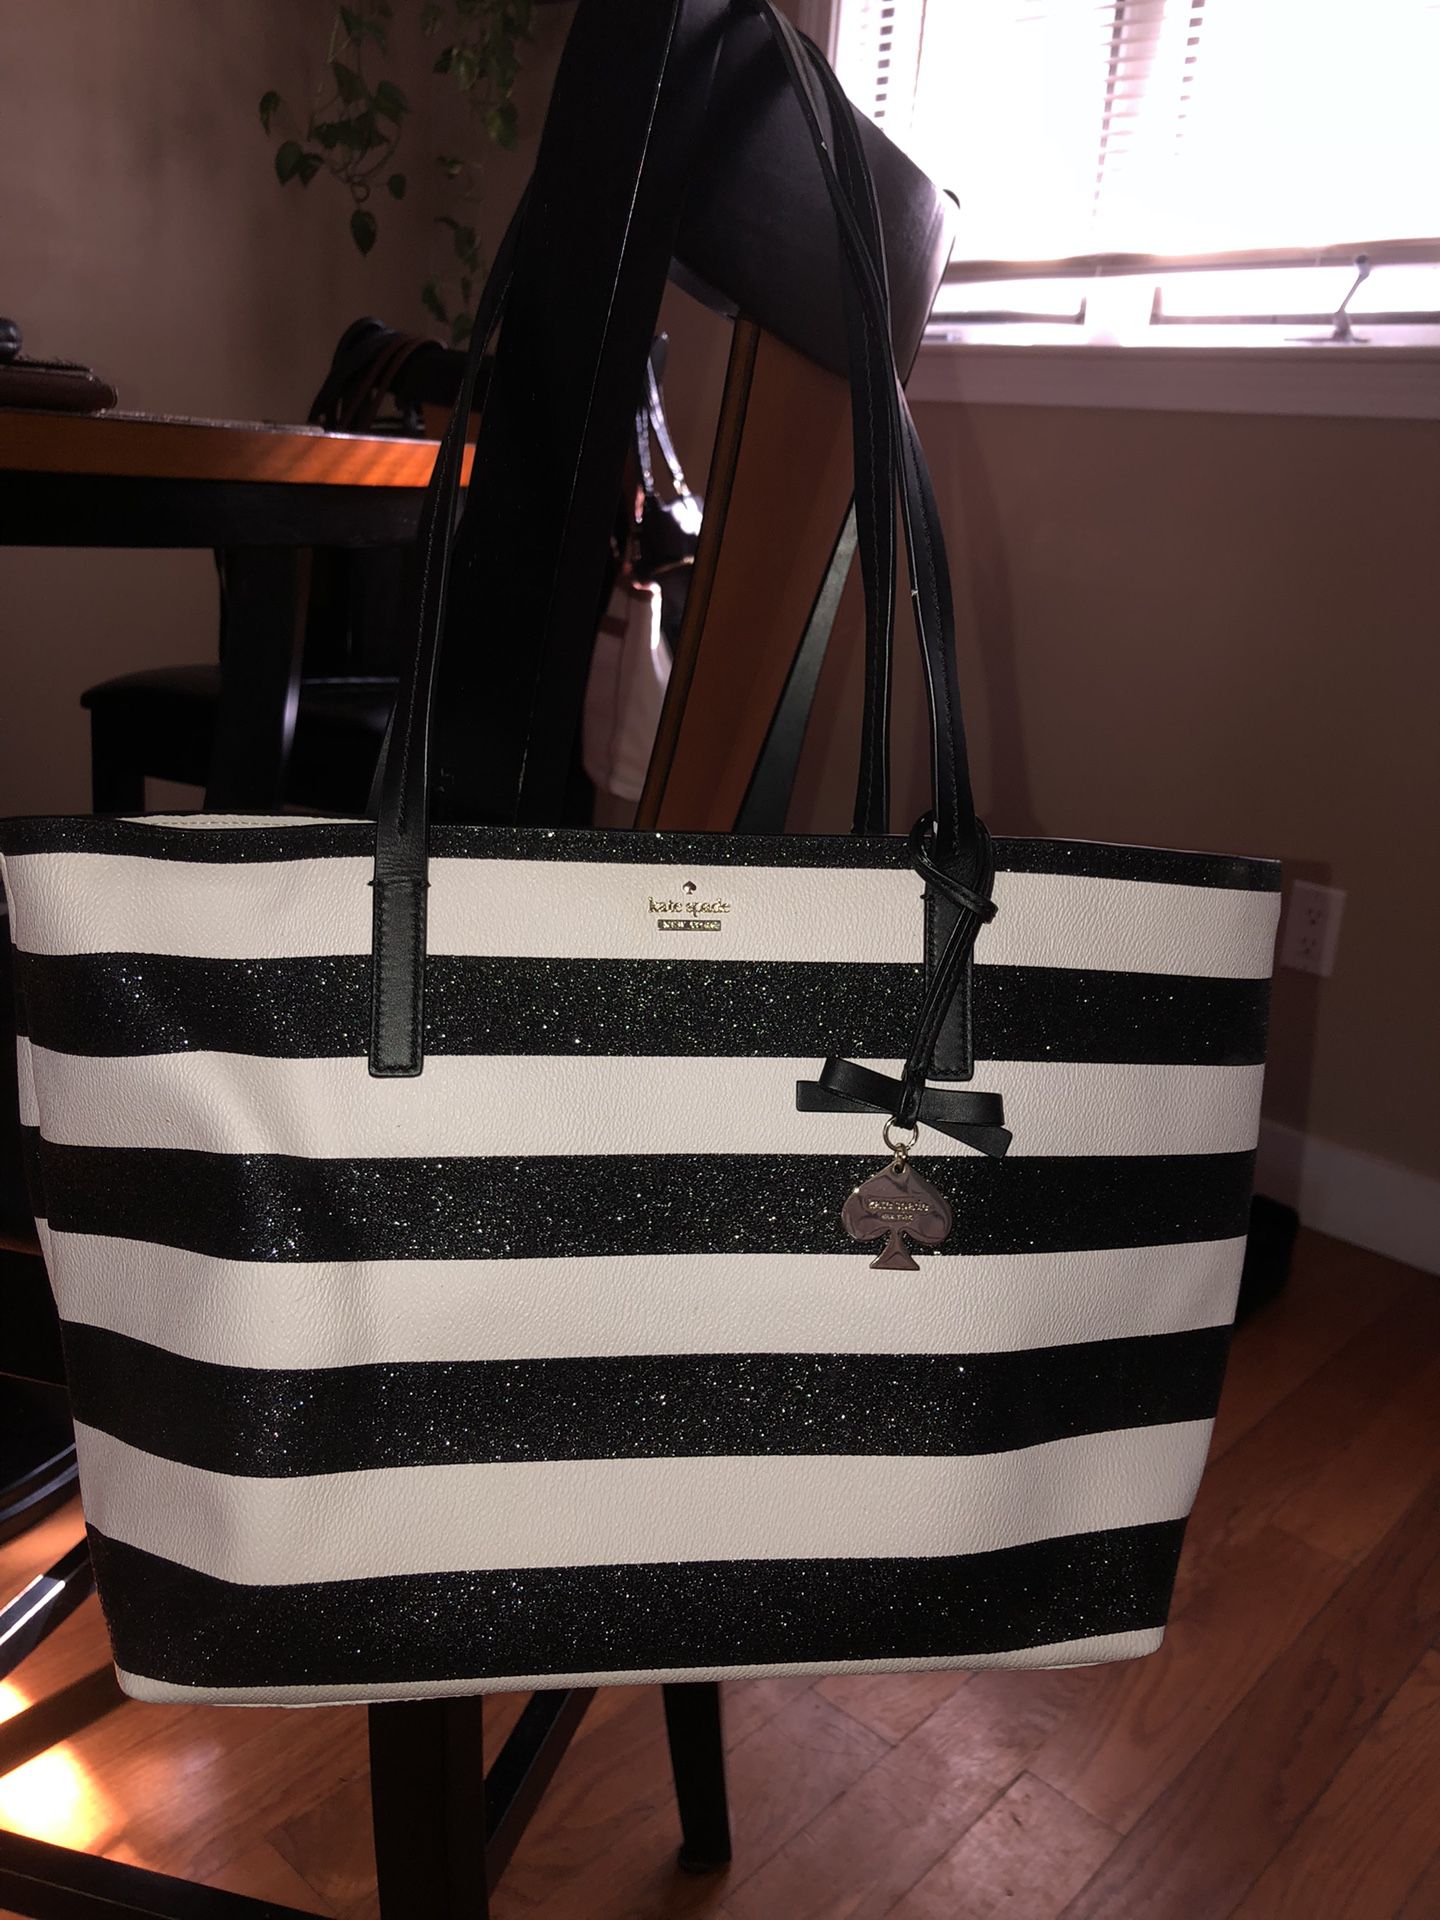 Kate Spade XLarge Tote Purse or Travel Bag White and Sparkling Black!